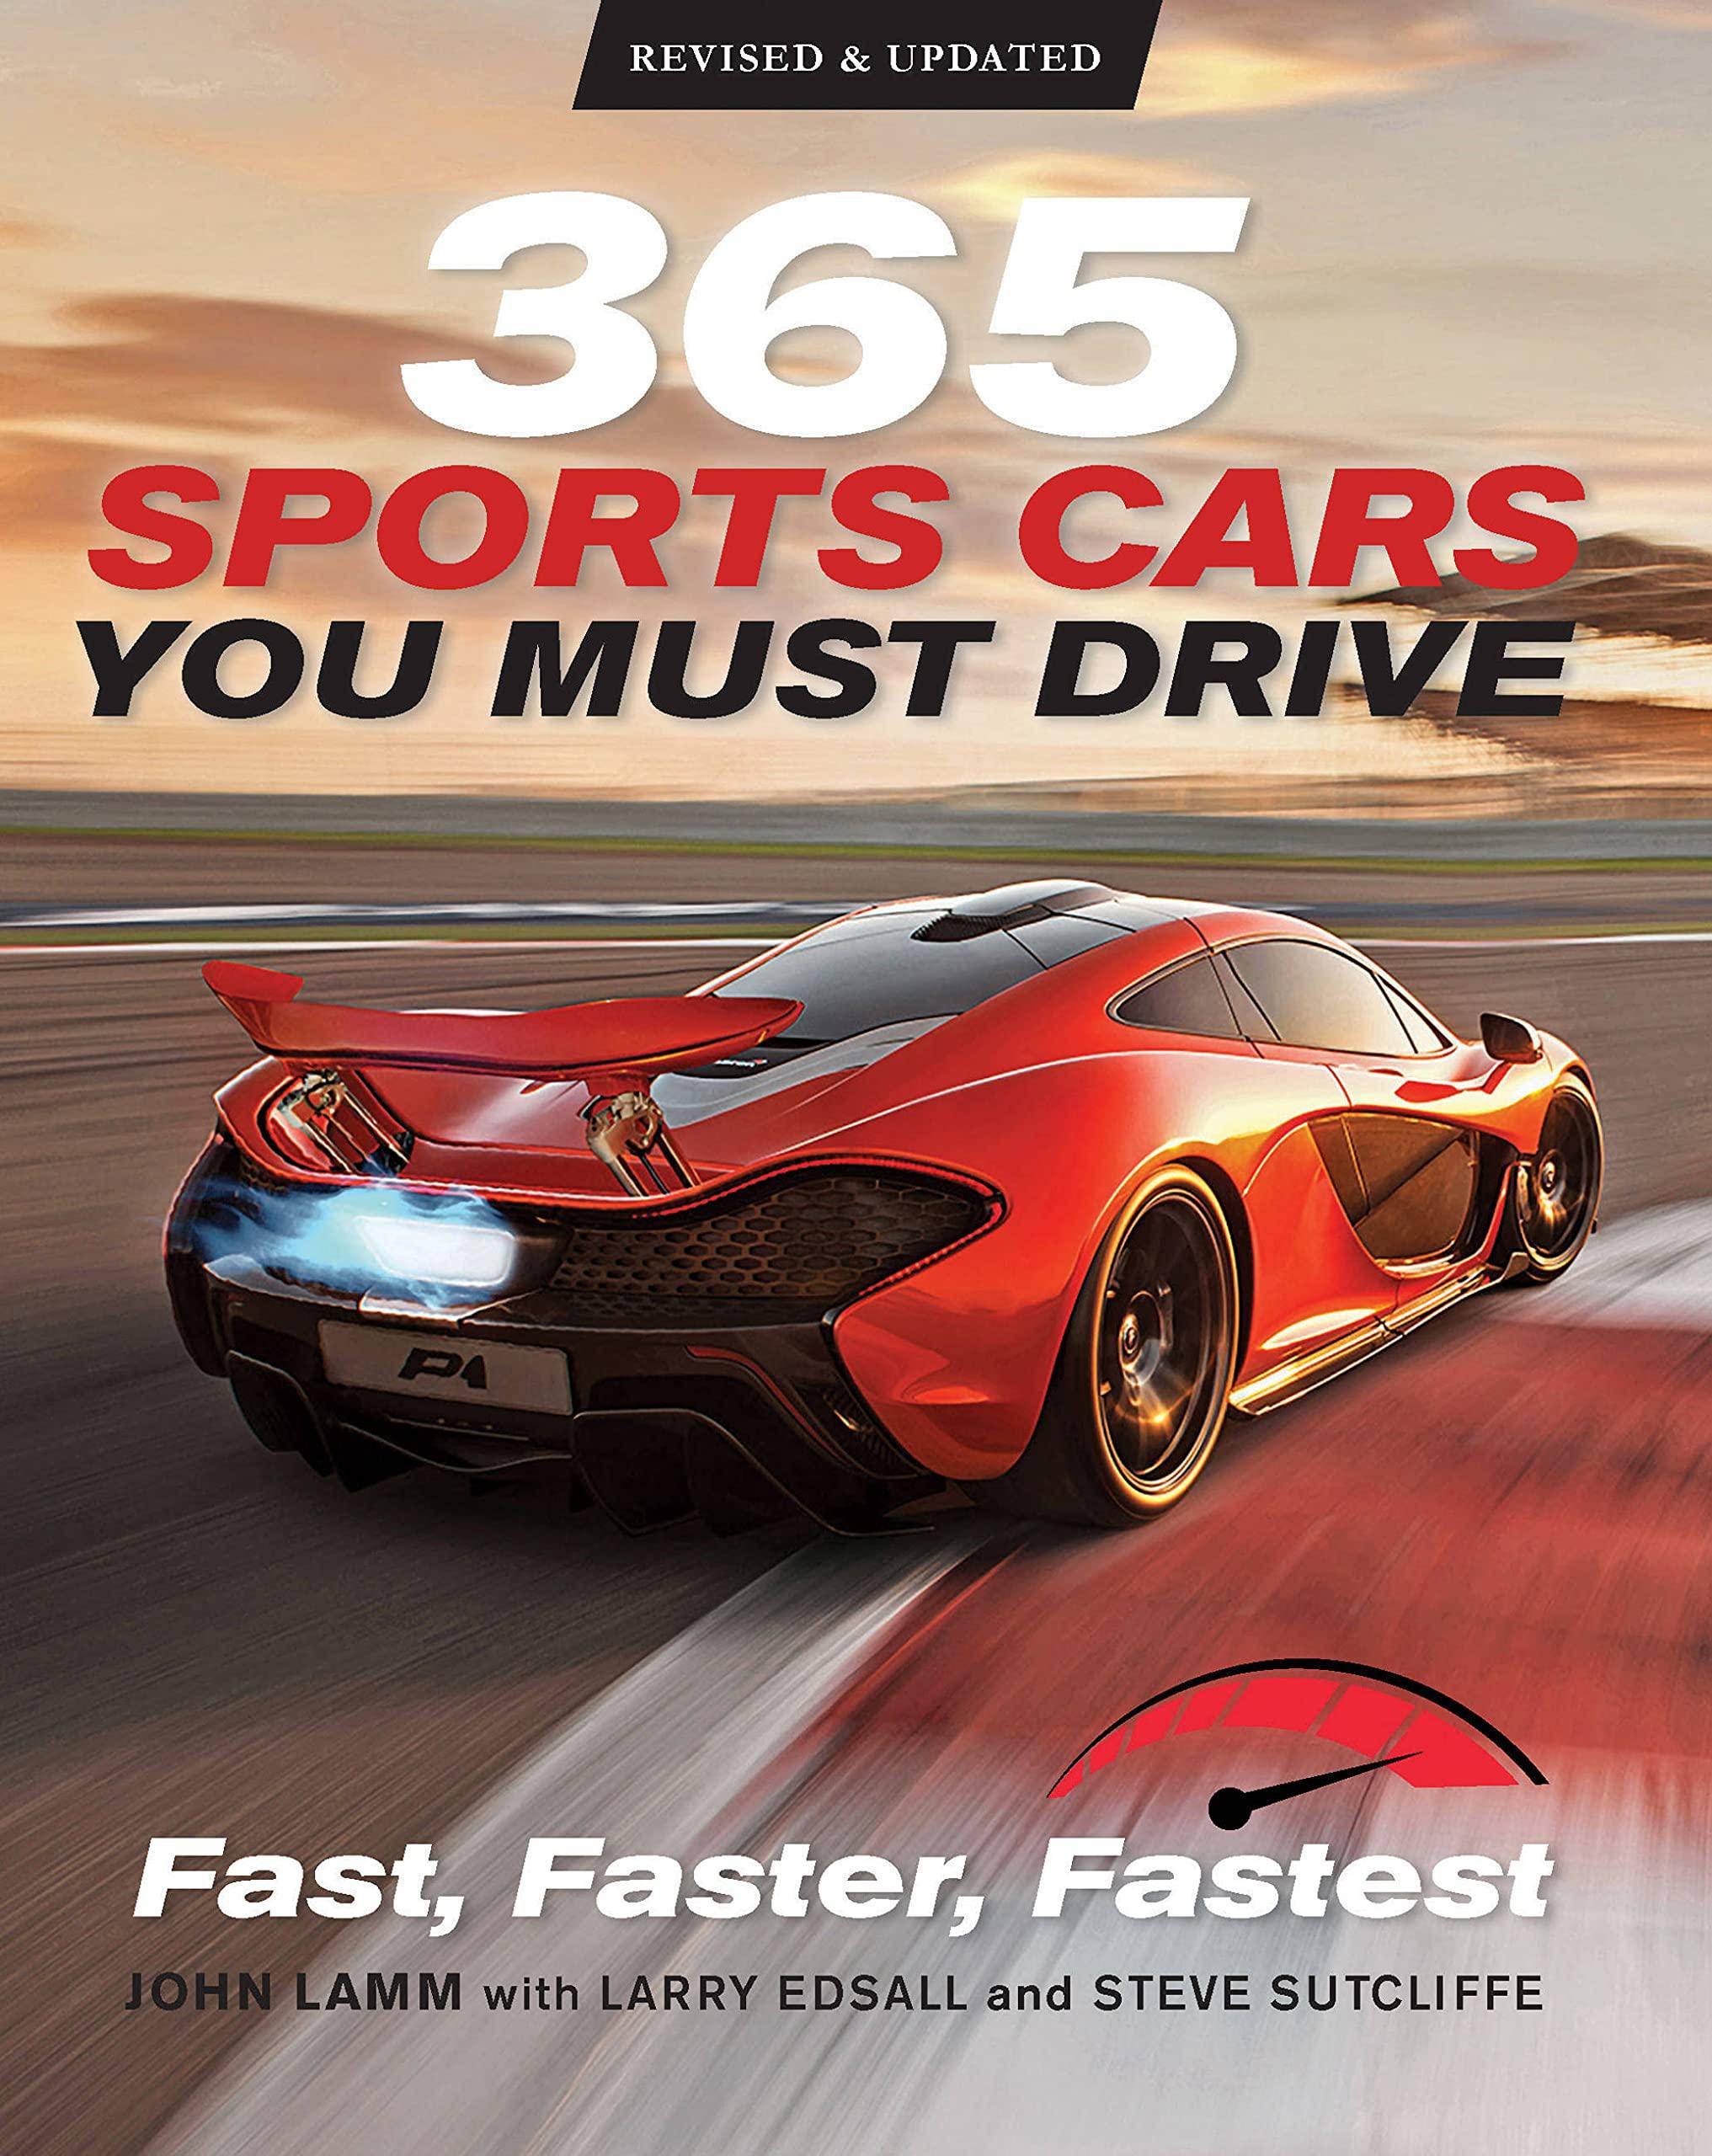 365 Sports Cars You Must Drive: Fast, Faster, Fastest - Revised - SureShot Books Publishing LLC